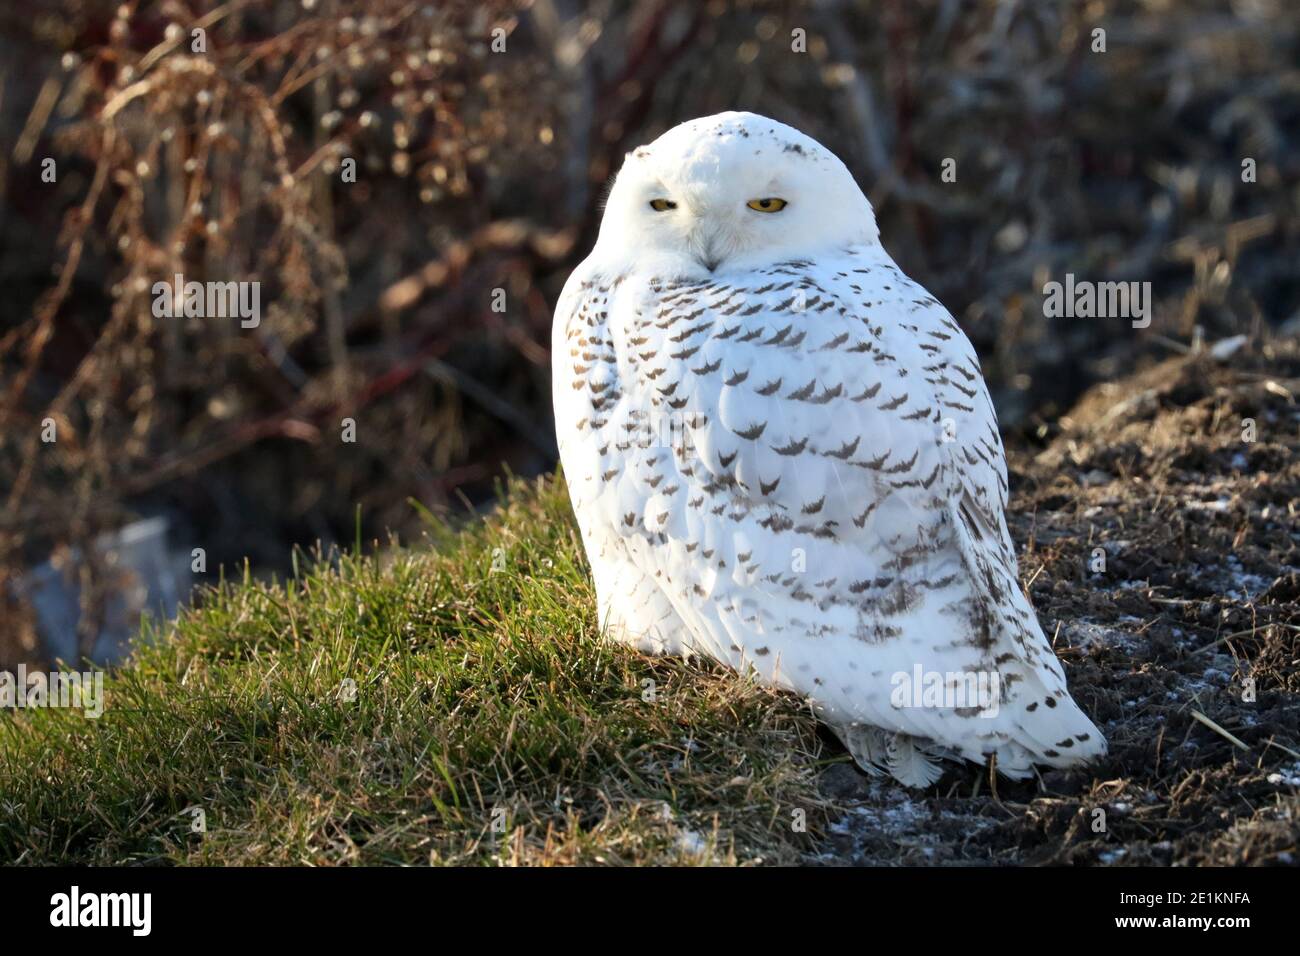 Female Snowy Owl perched on building or ground Stock Photo